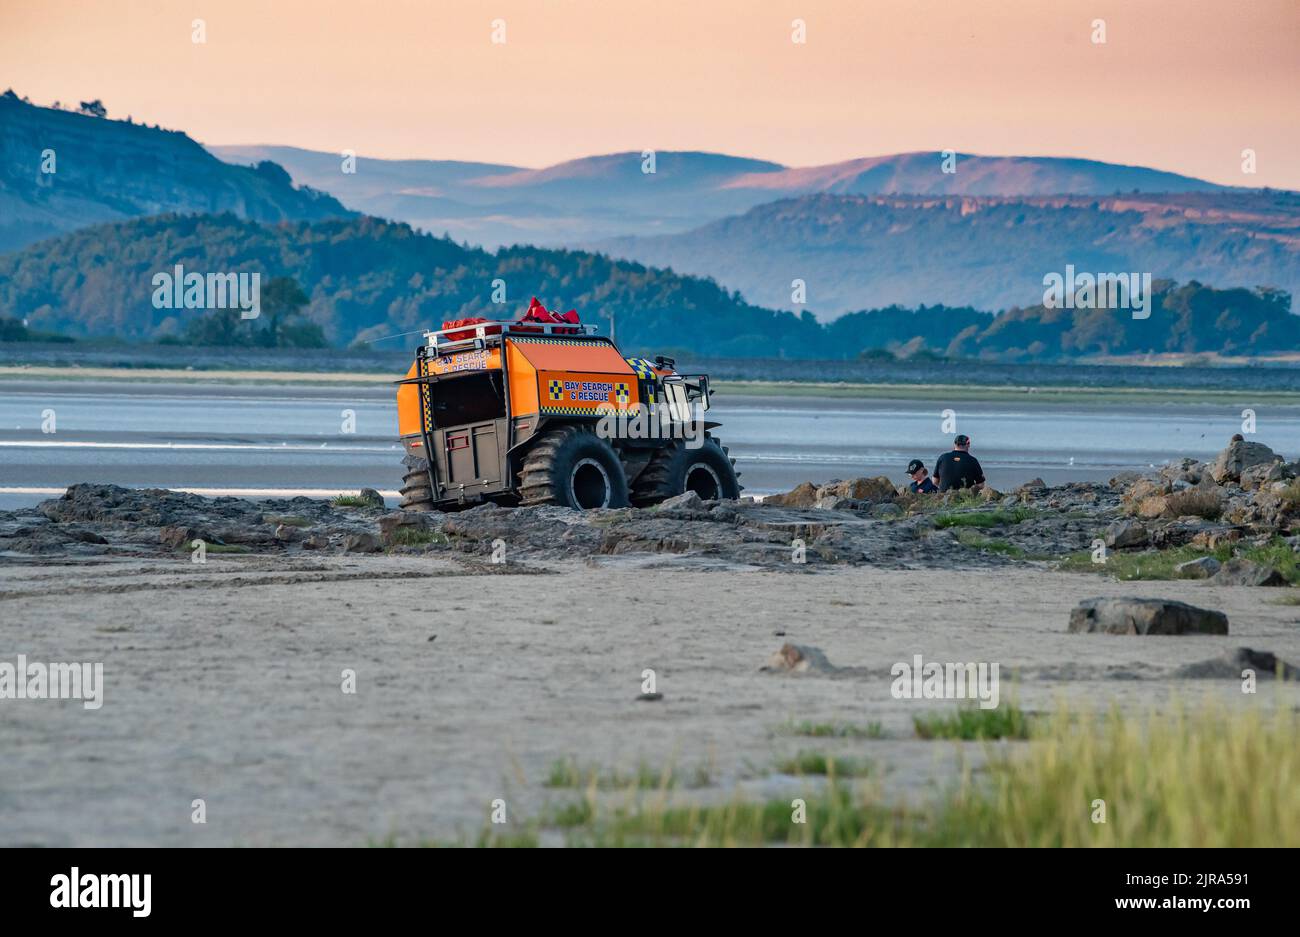 A Bay Search and Rescue Sherp All Terrain Vehicle at White Creek, Arnside, Milnthorpe, Cumbria, UK Foto Stock